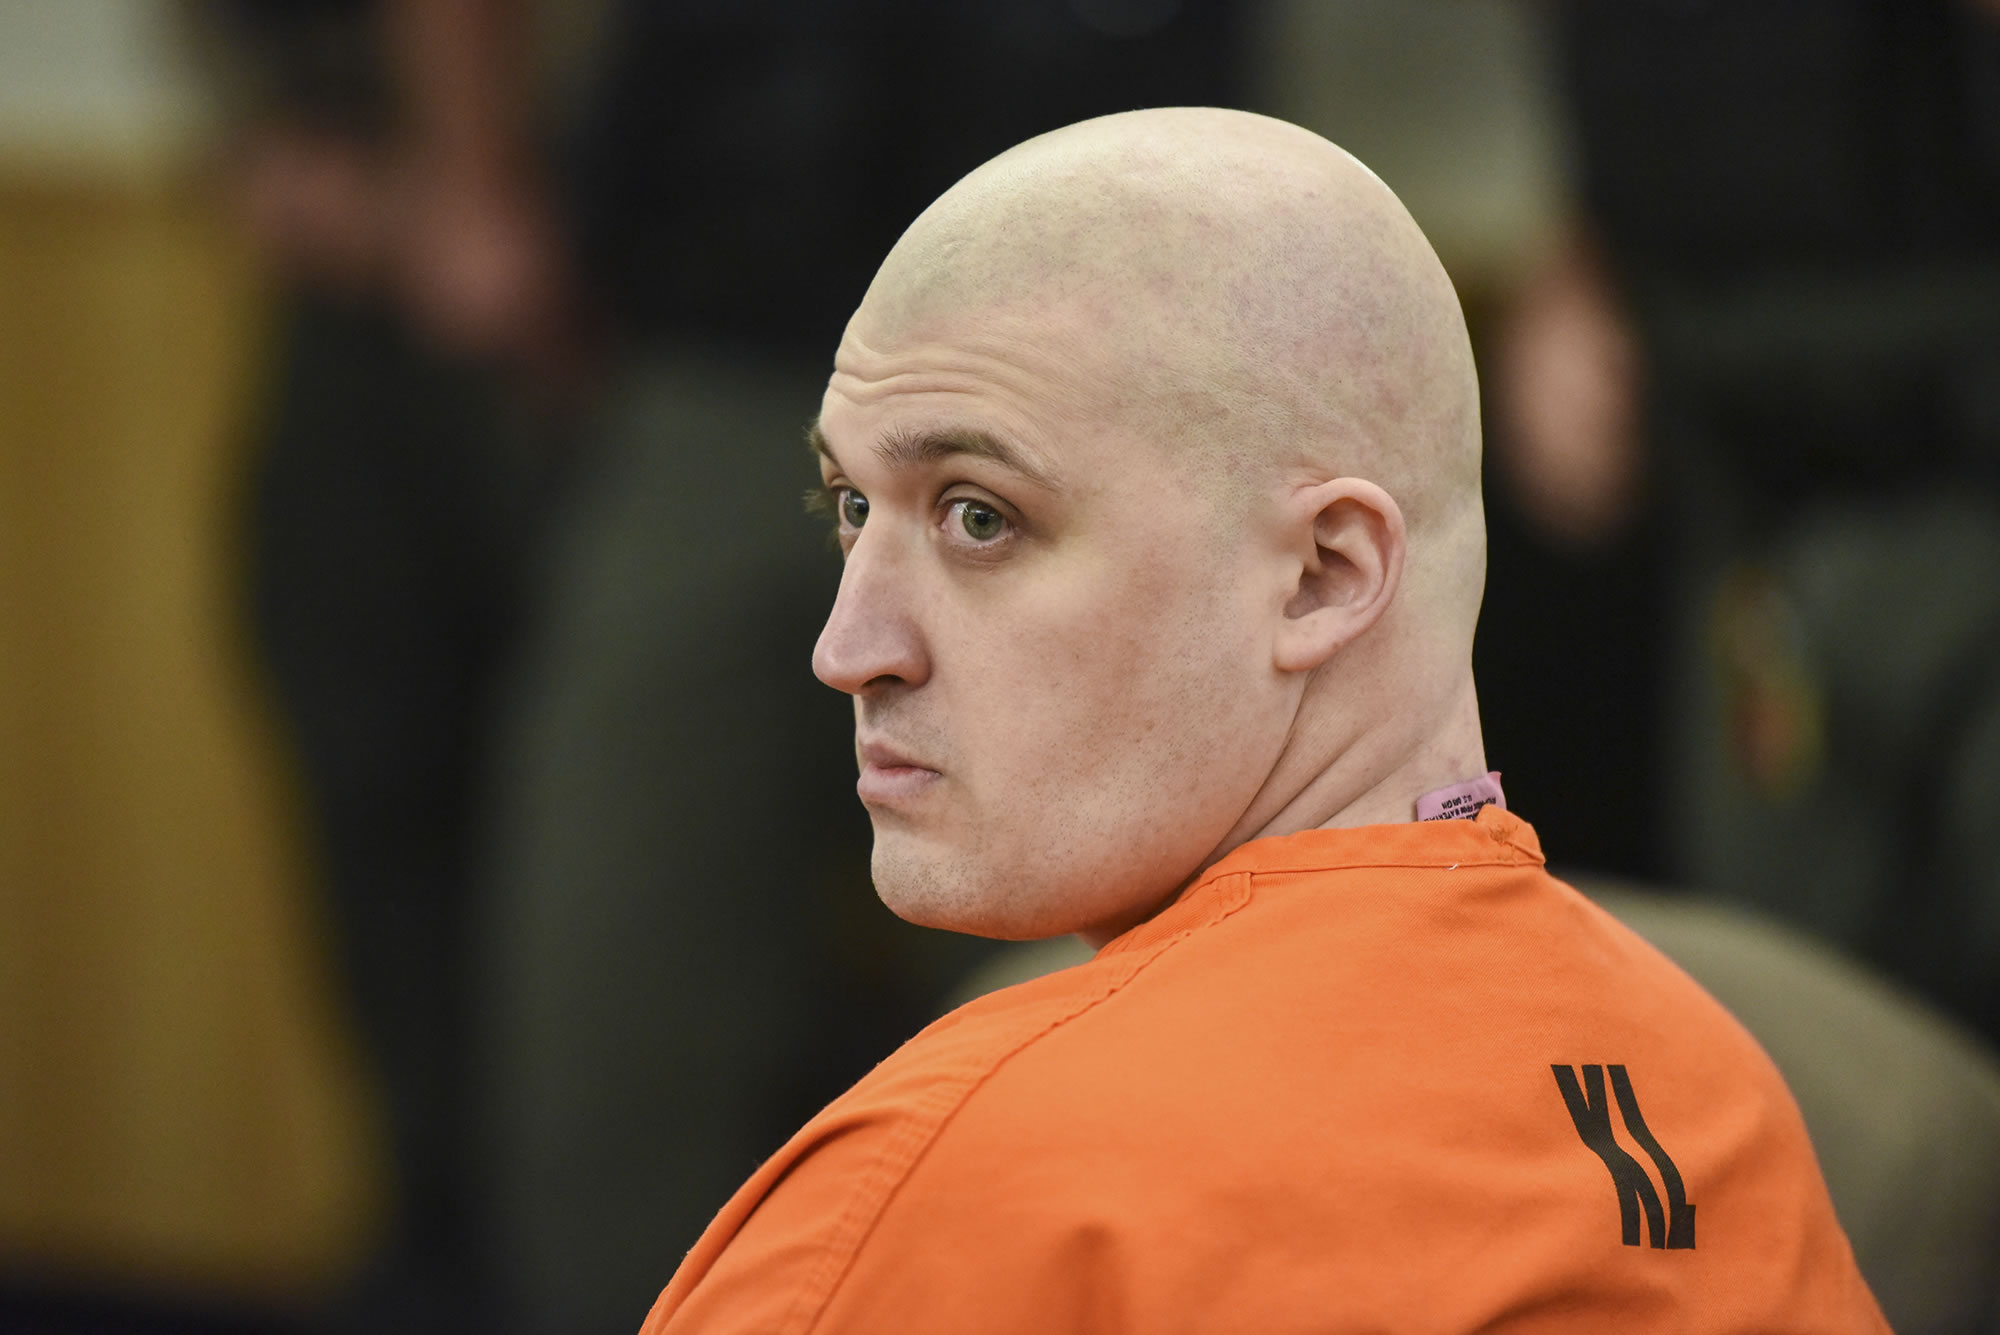 Triple murderer Brent Luyster appears in Clark County Superior Court Monday for his sentencing, which was delayed until Dec. 15 by Judge Robert Lewis.